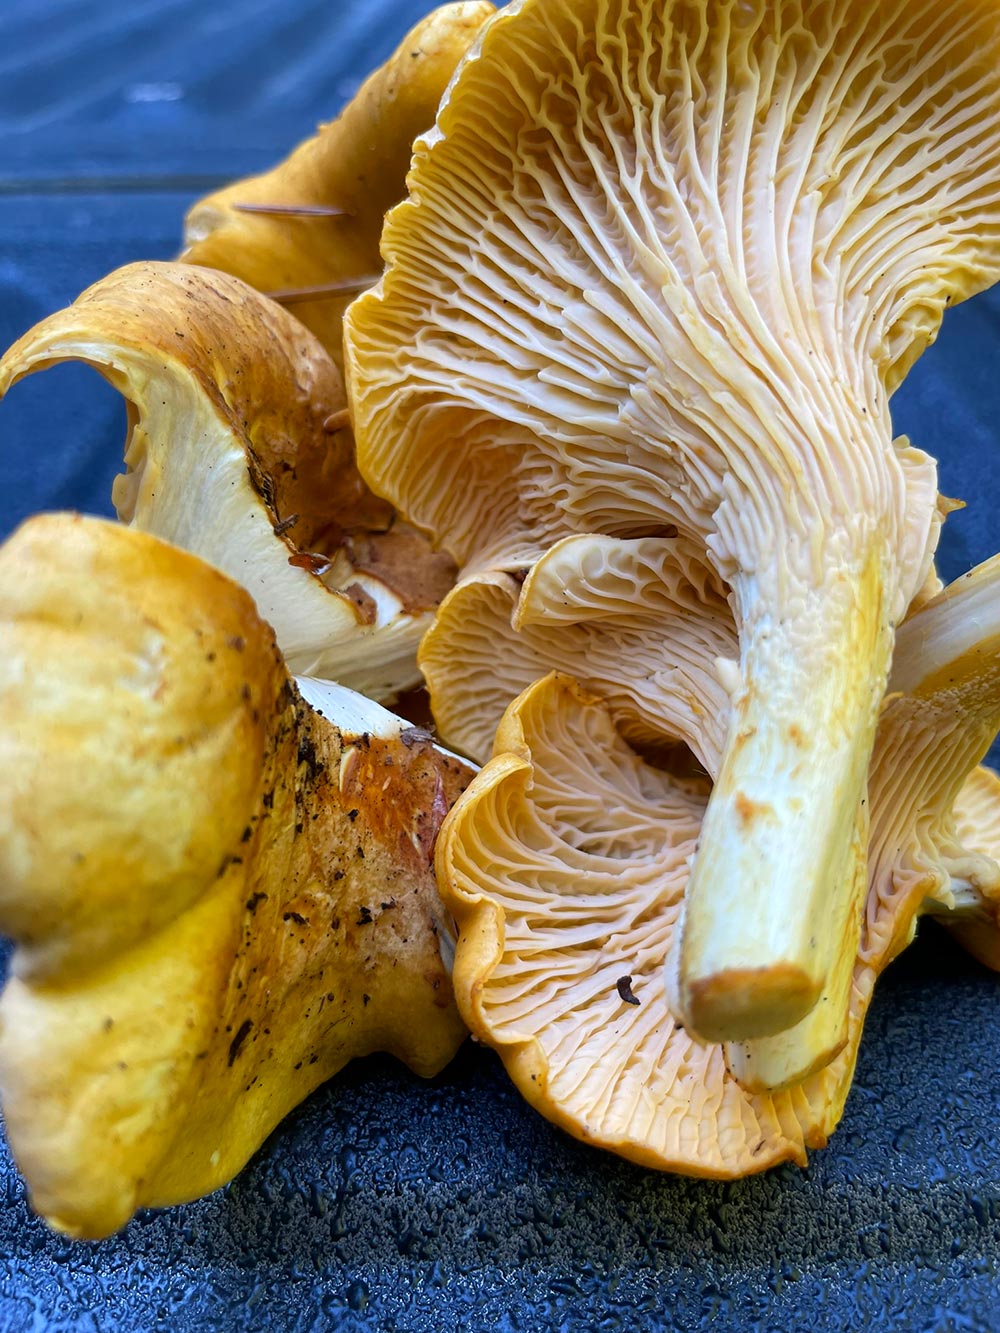 The gills of the undersides of chanterelle mushrooms